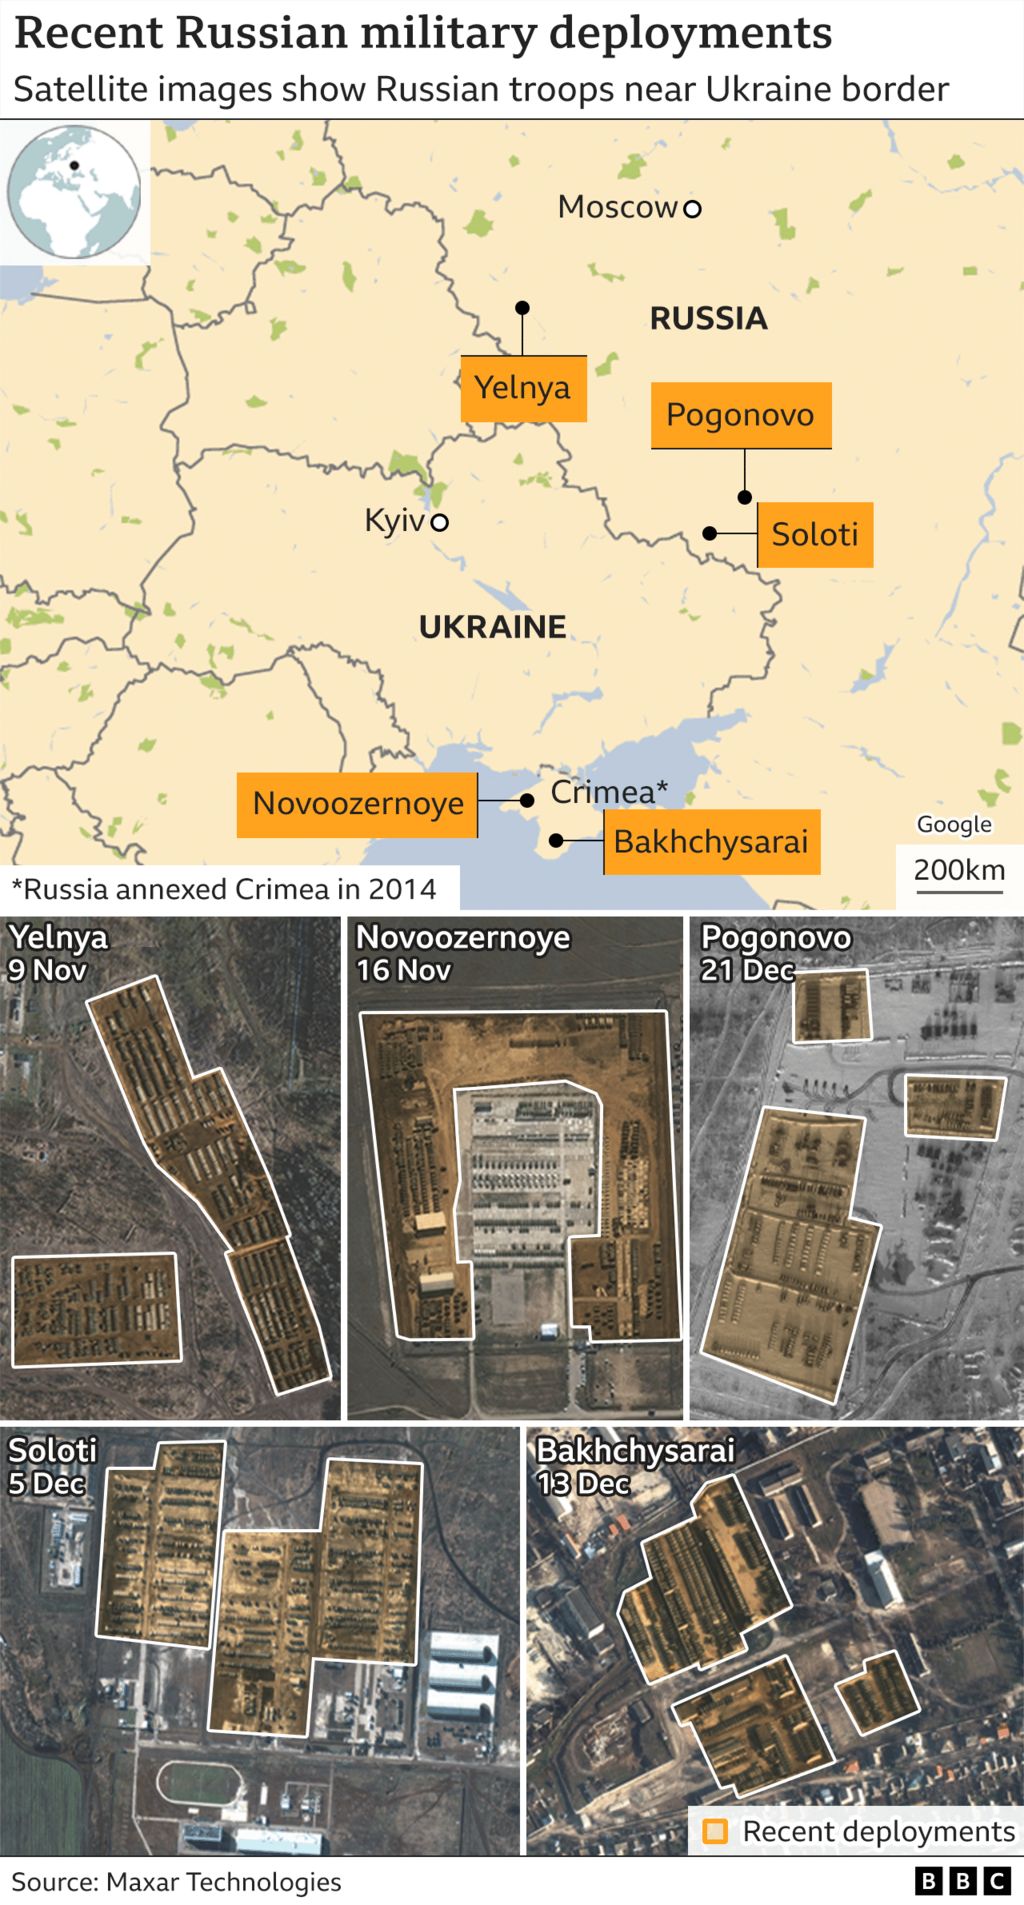 Map of Russia and Ukraine with satellite images showing recent Russian military deployments near the border